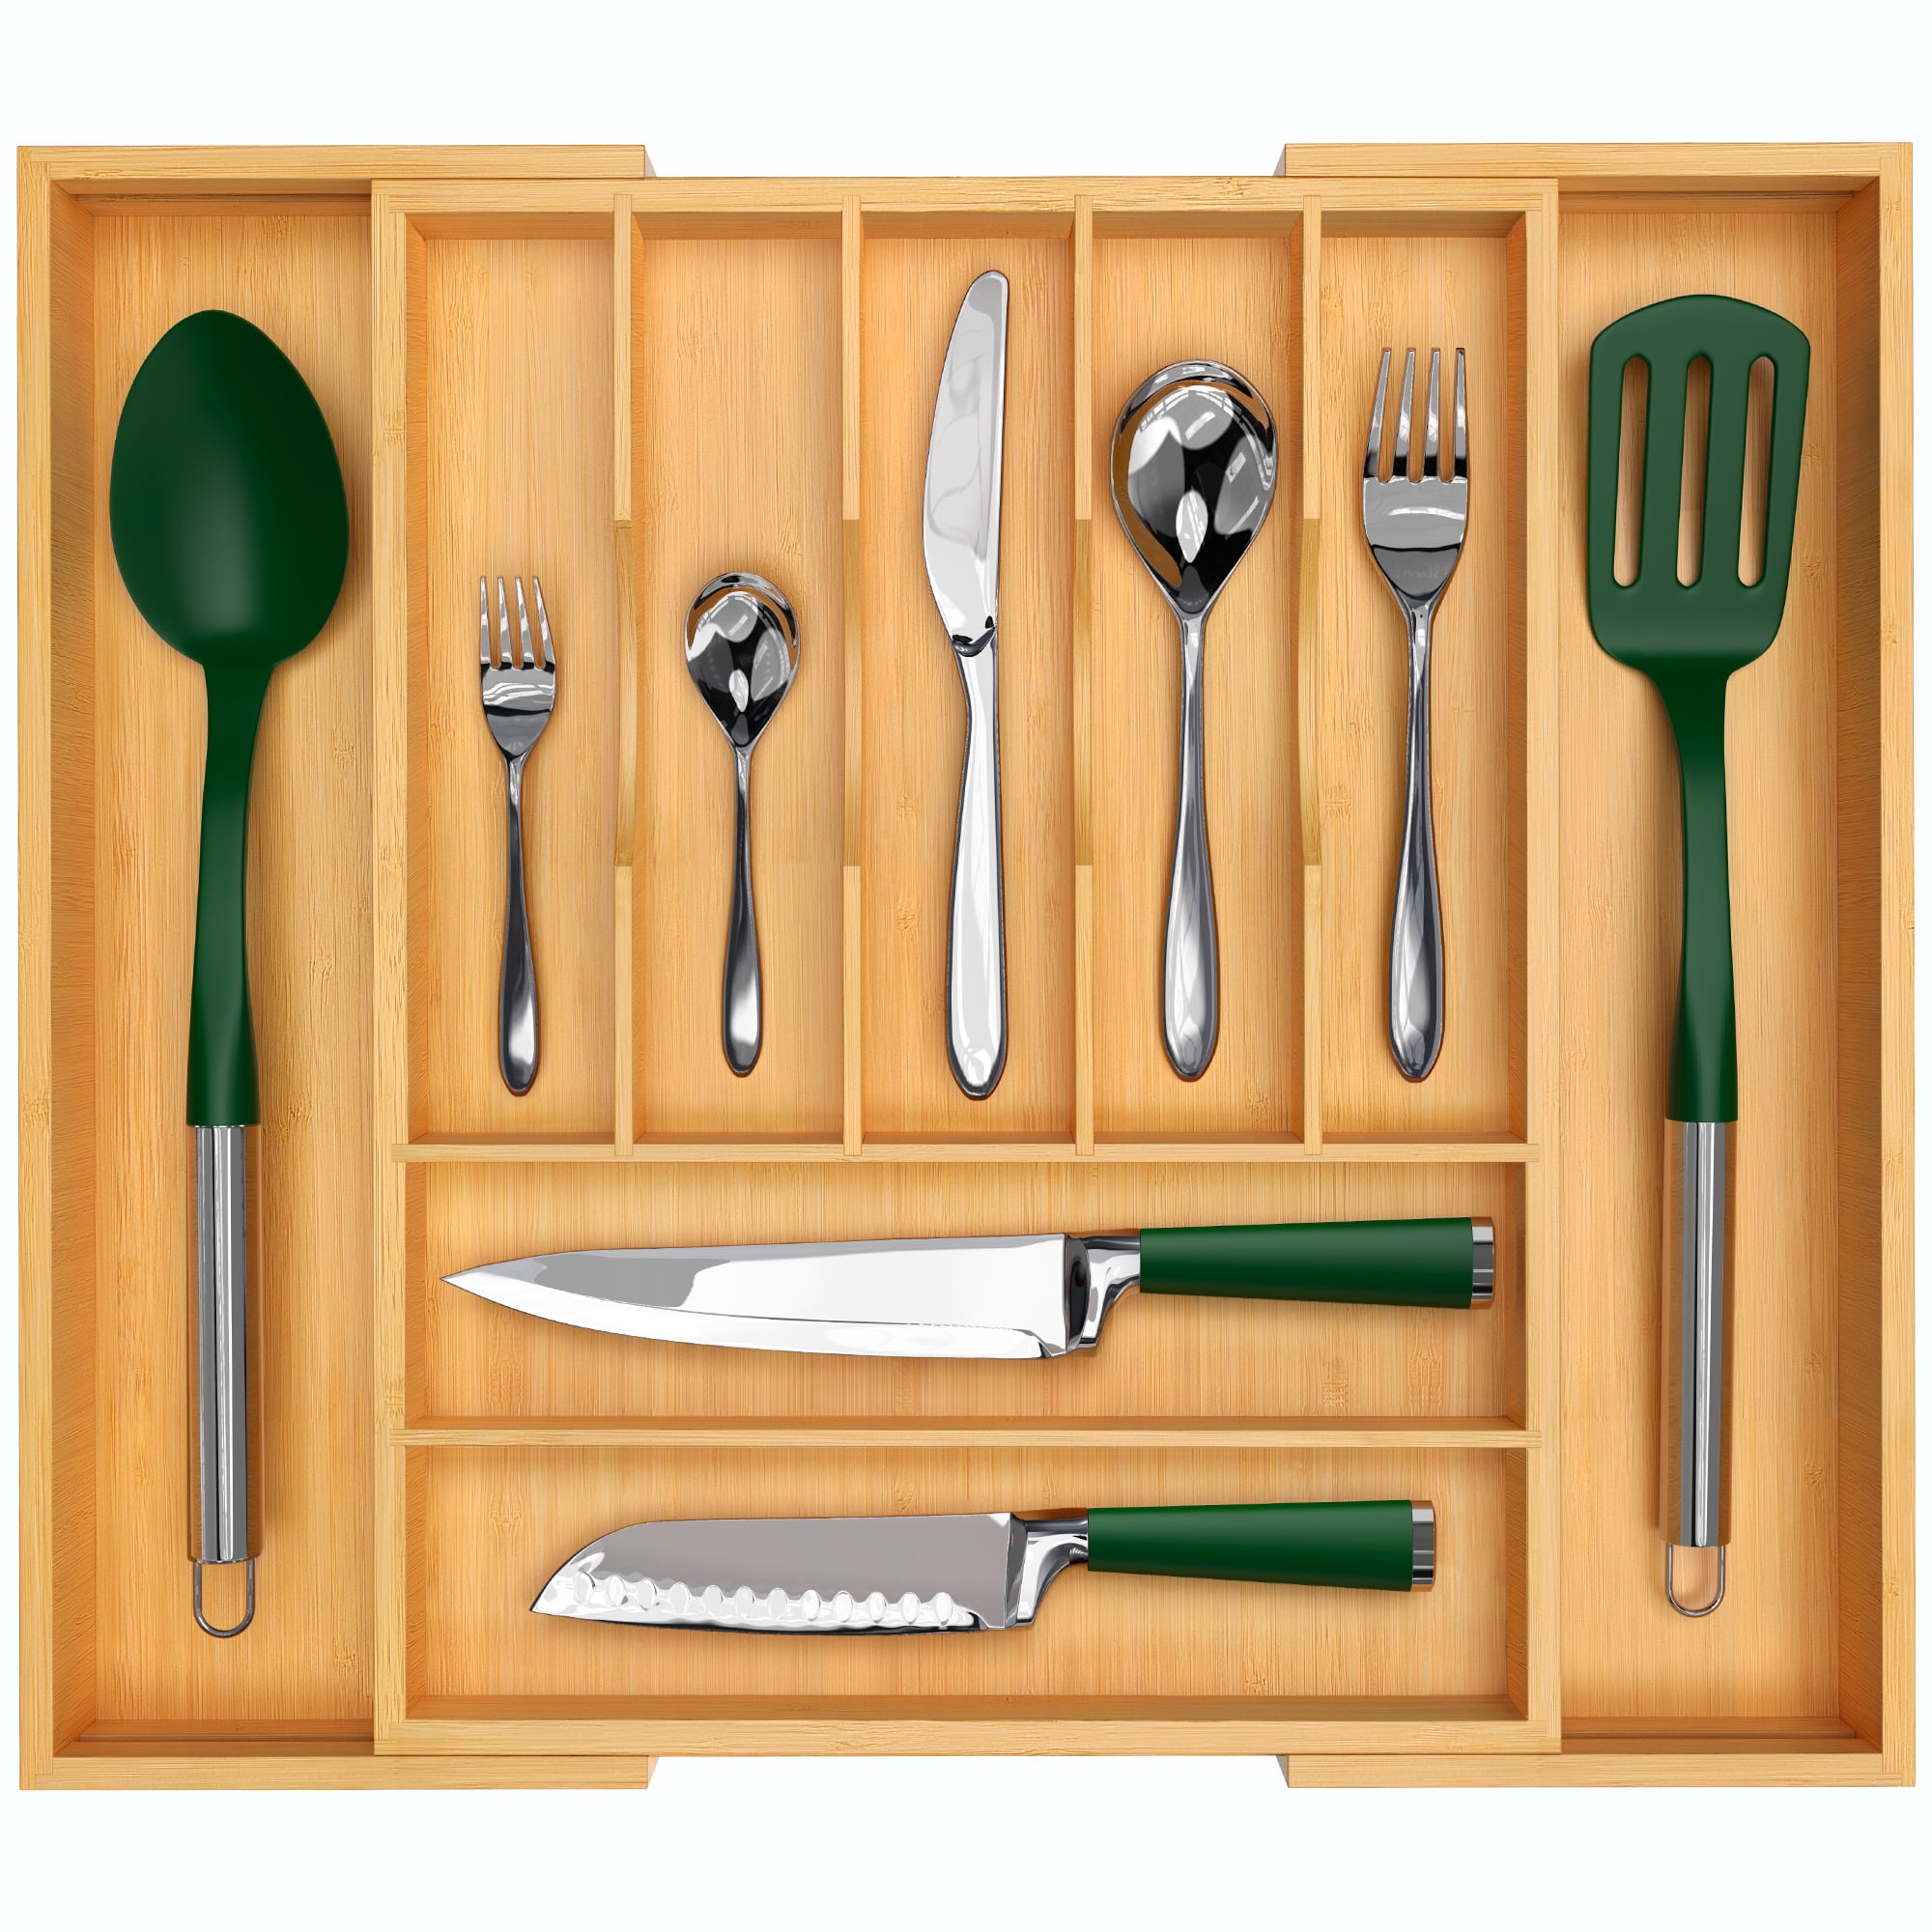 Our Table™ Wood Mixed Utensil Set in Natural, 5 pc - Kroger